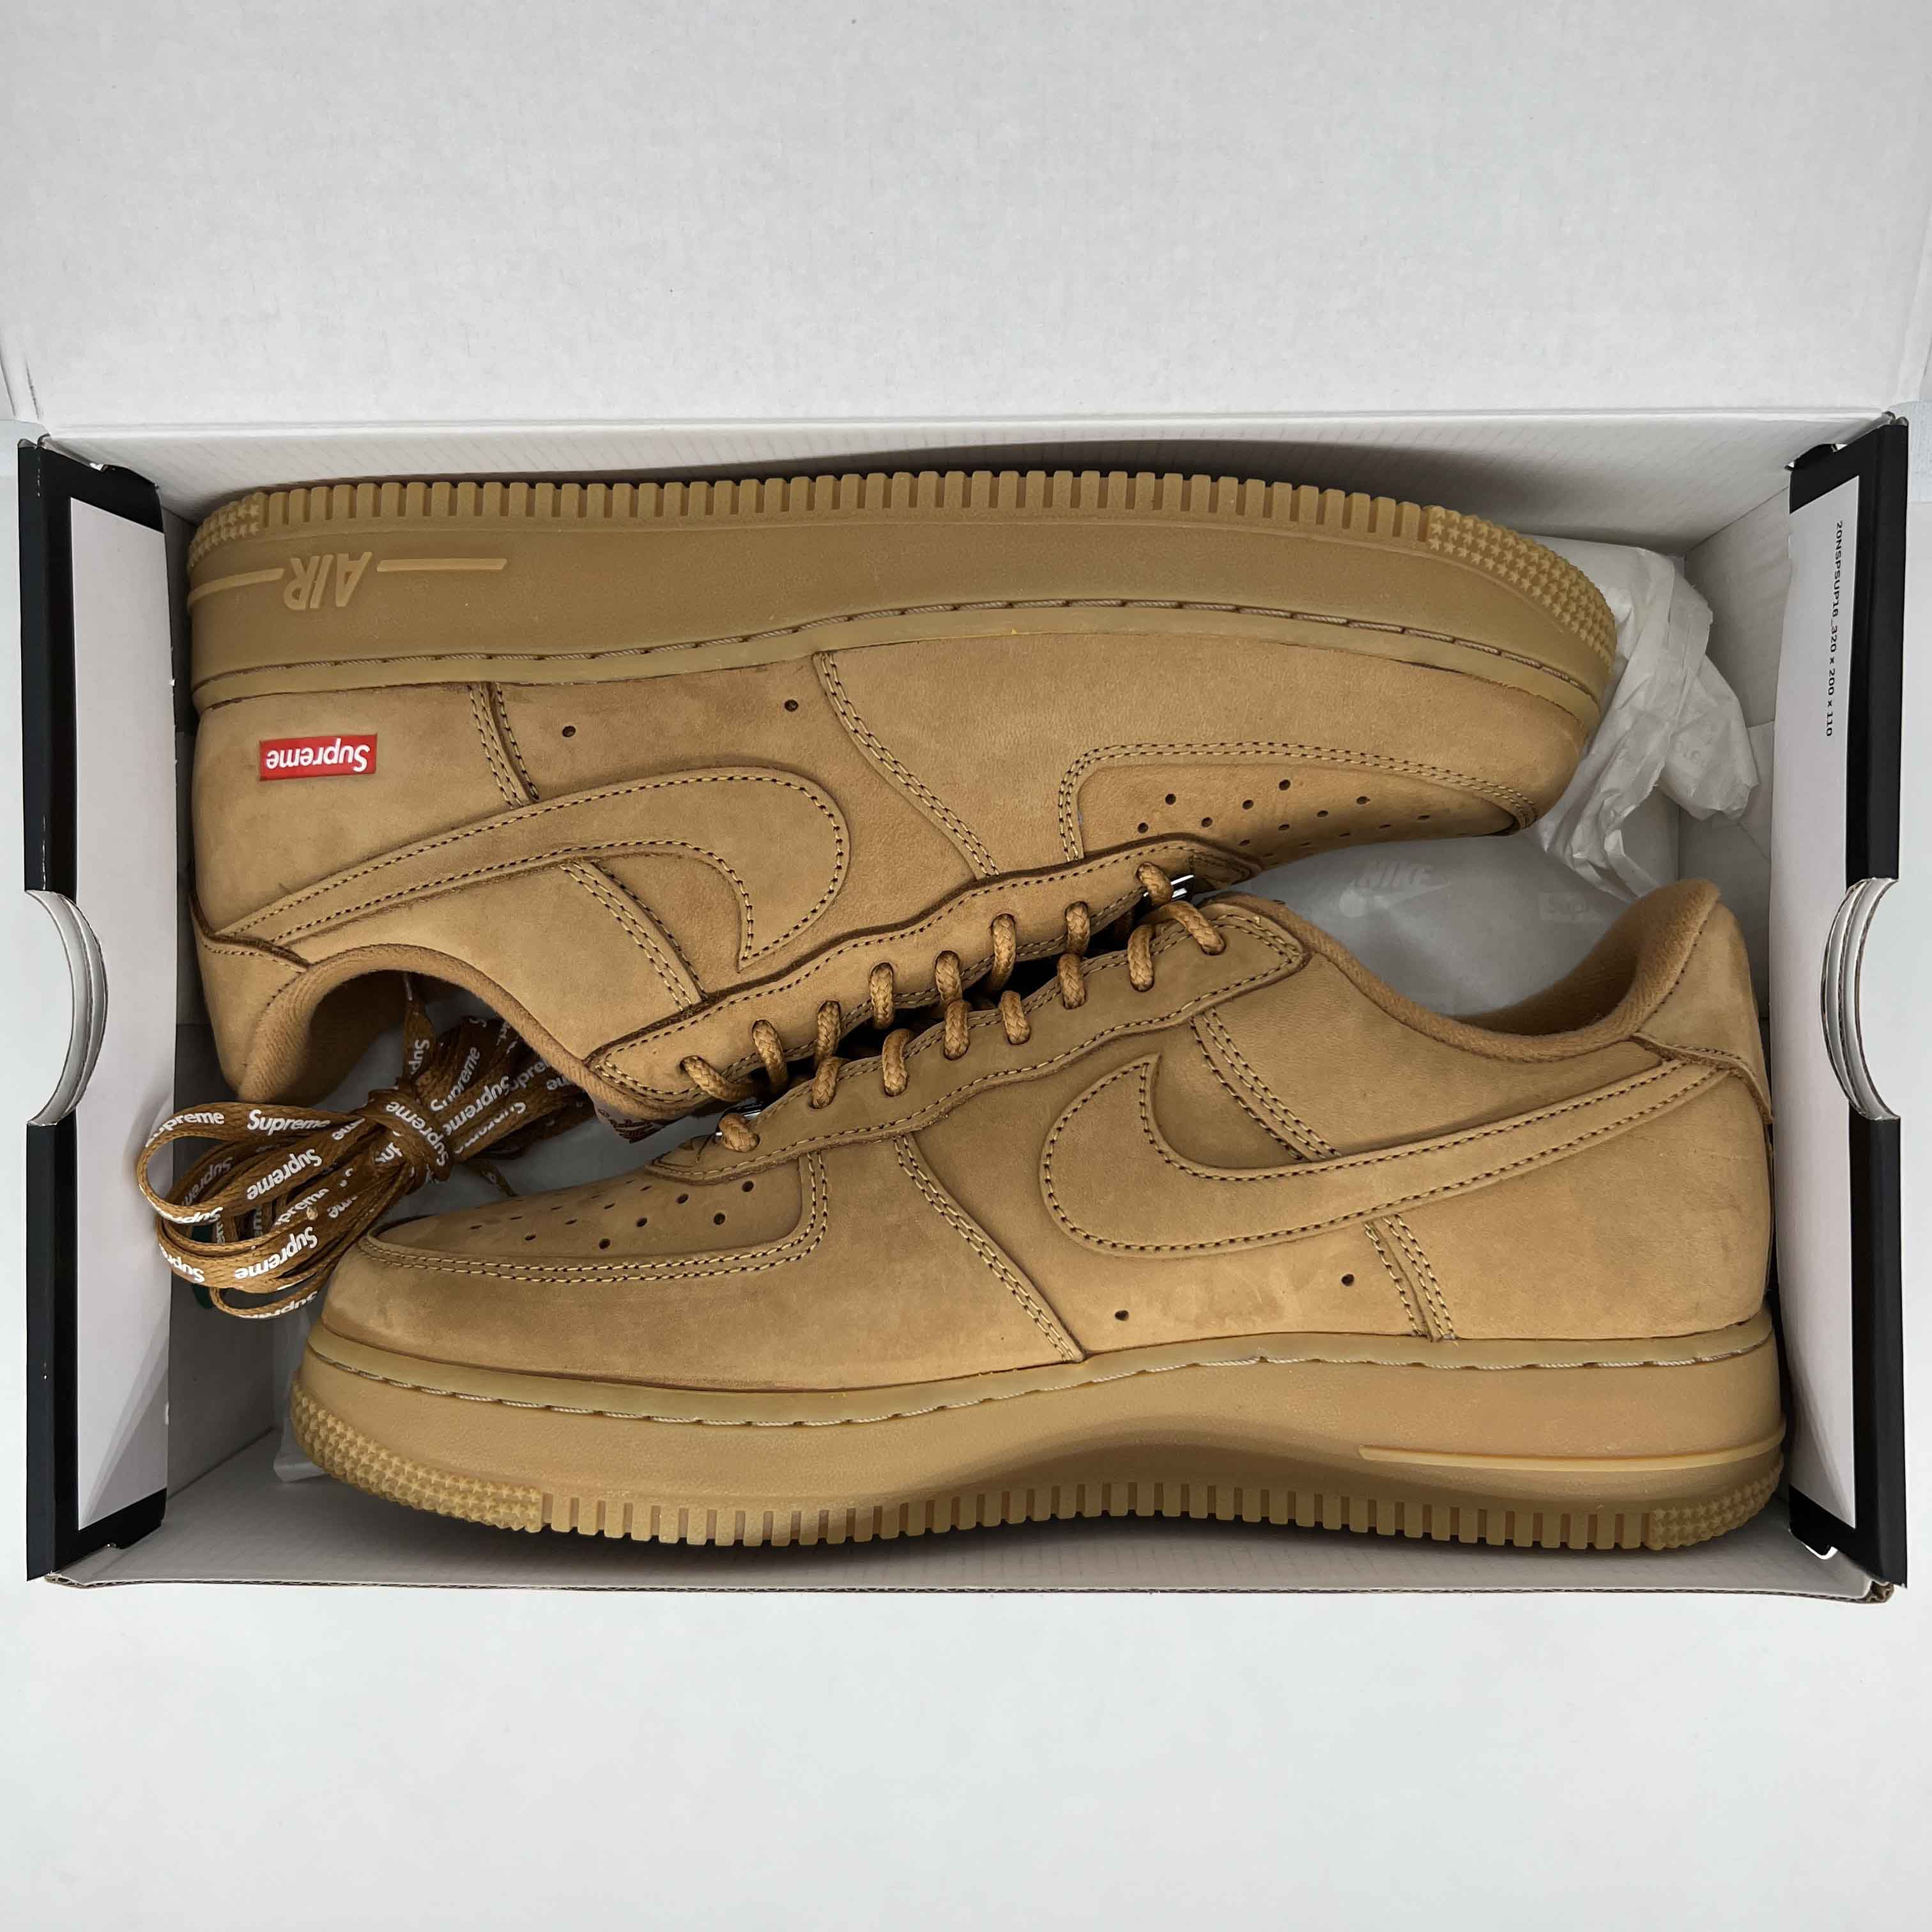 Nike Air Force 1 Low &quot;Supreme Wheat&quot; 2021 New Size 9.5